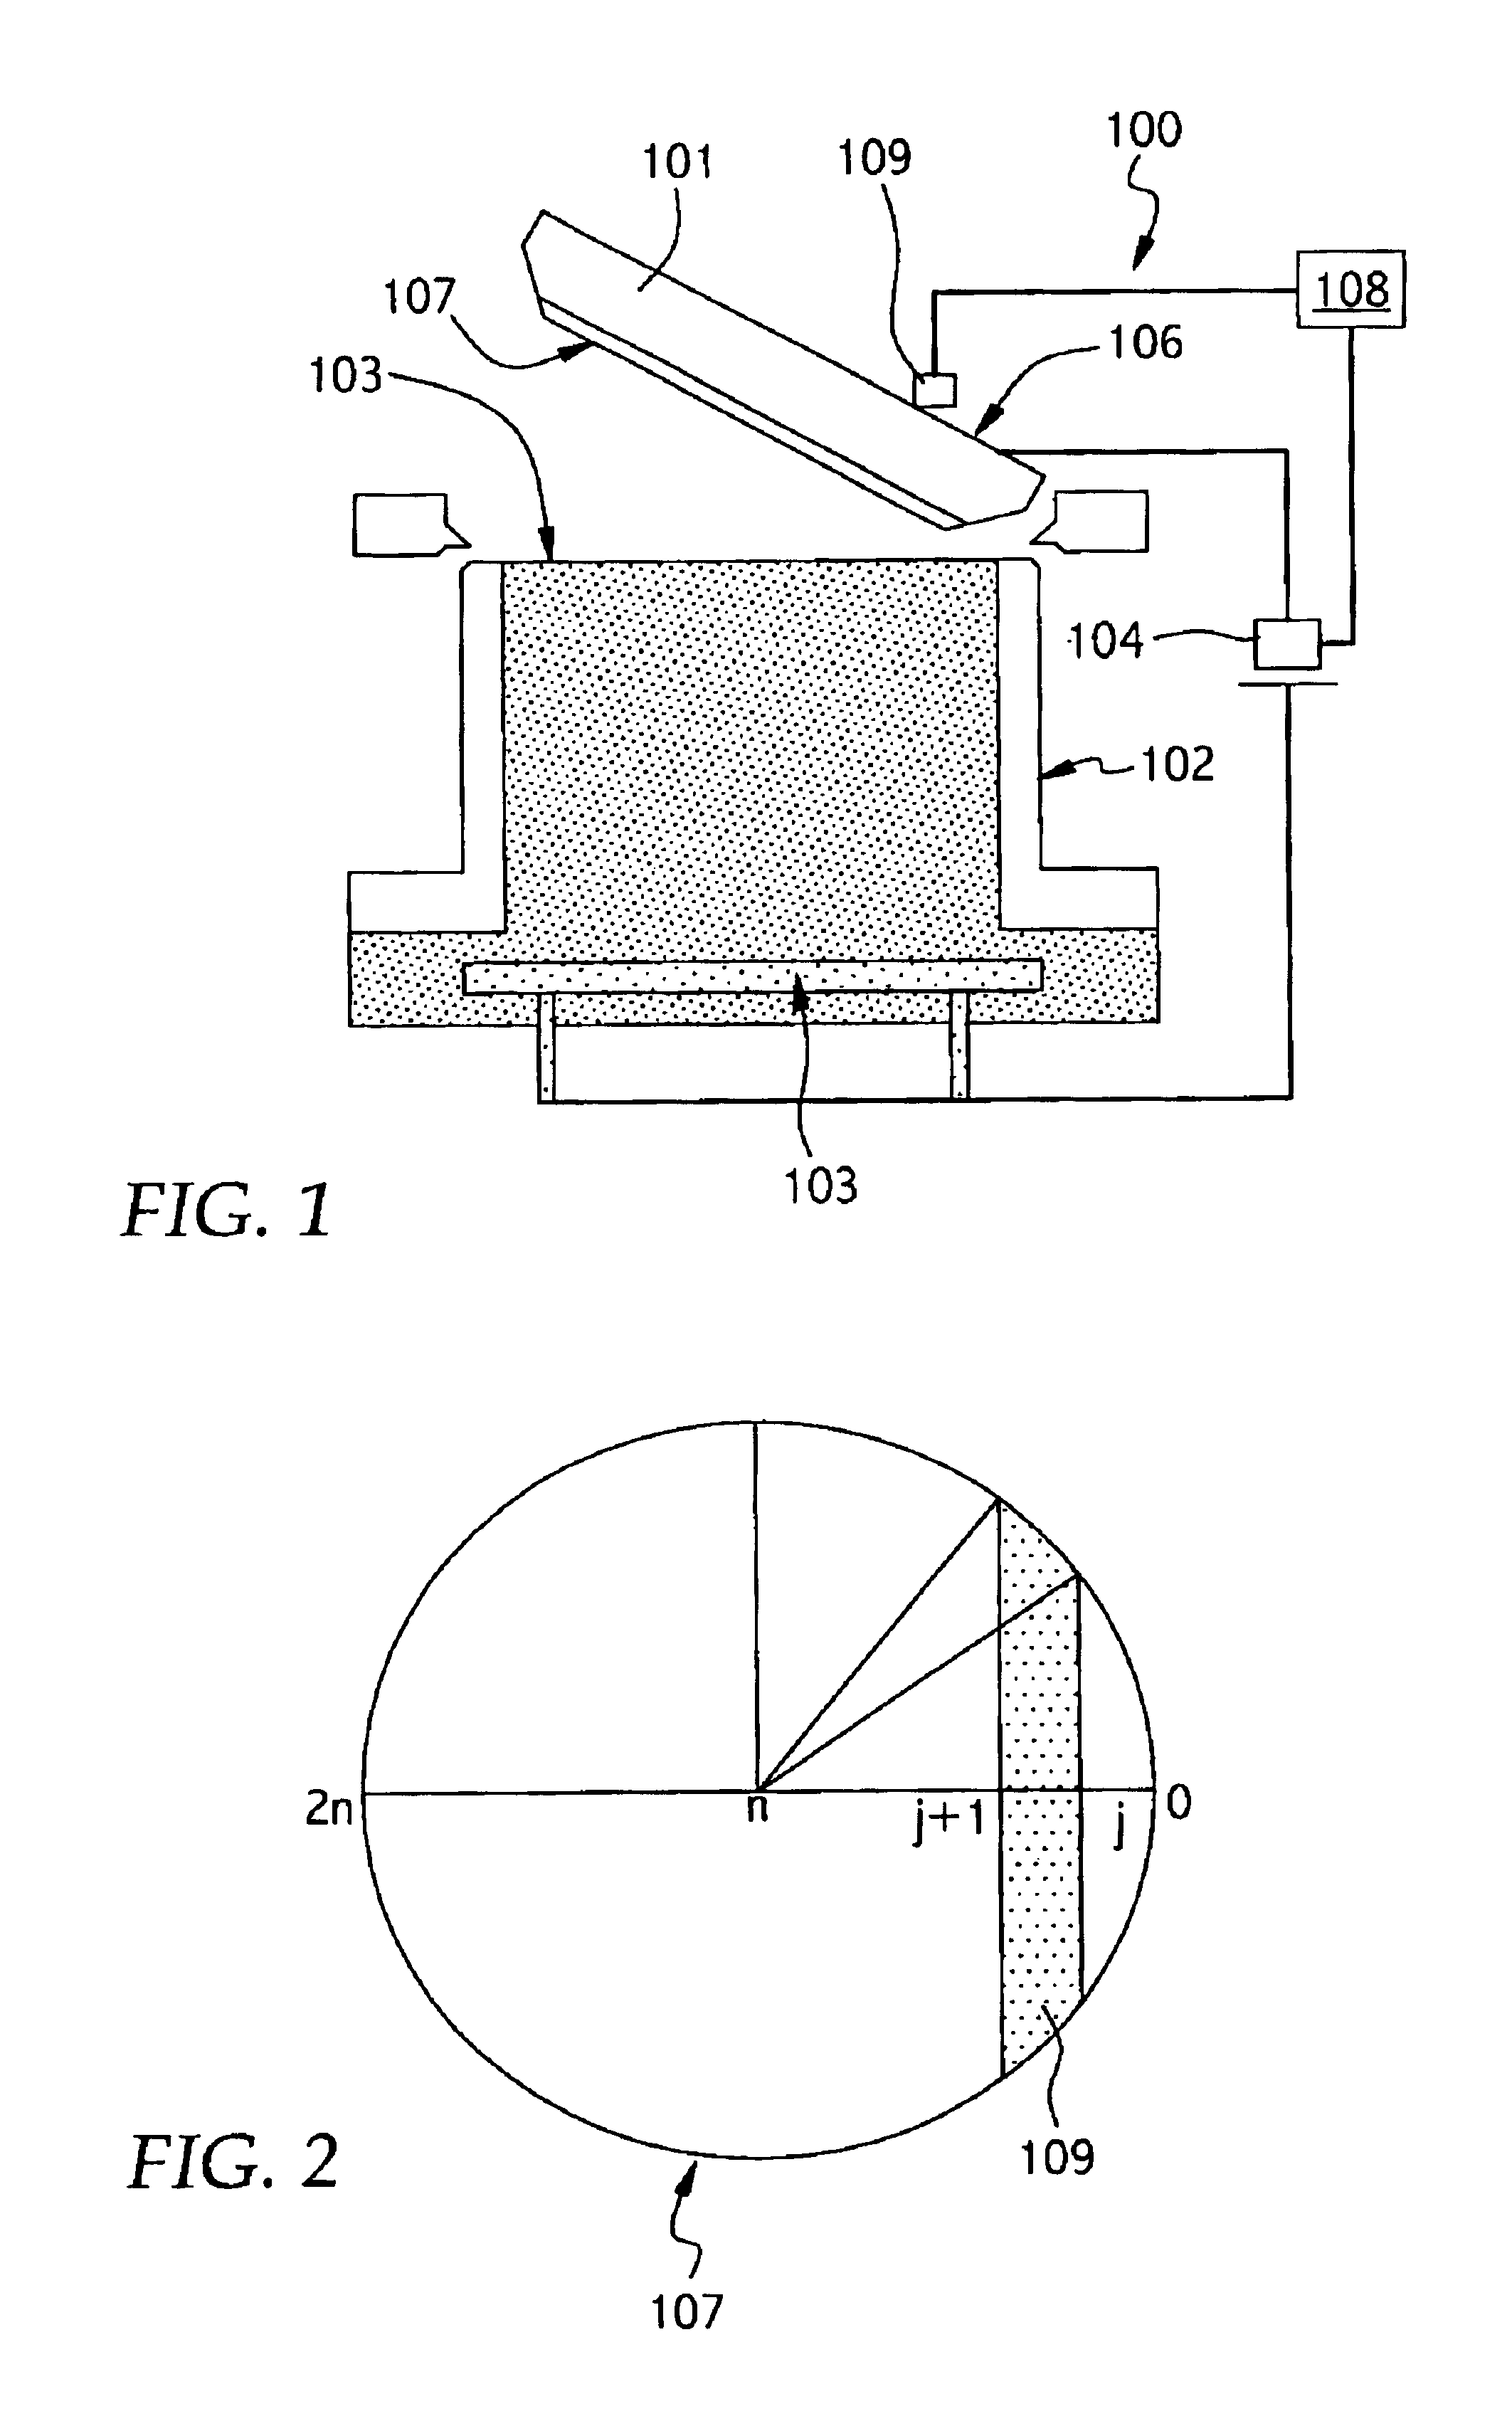 Method for regulating the electrical power applied to a substrate during an immersion process